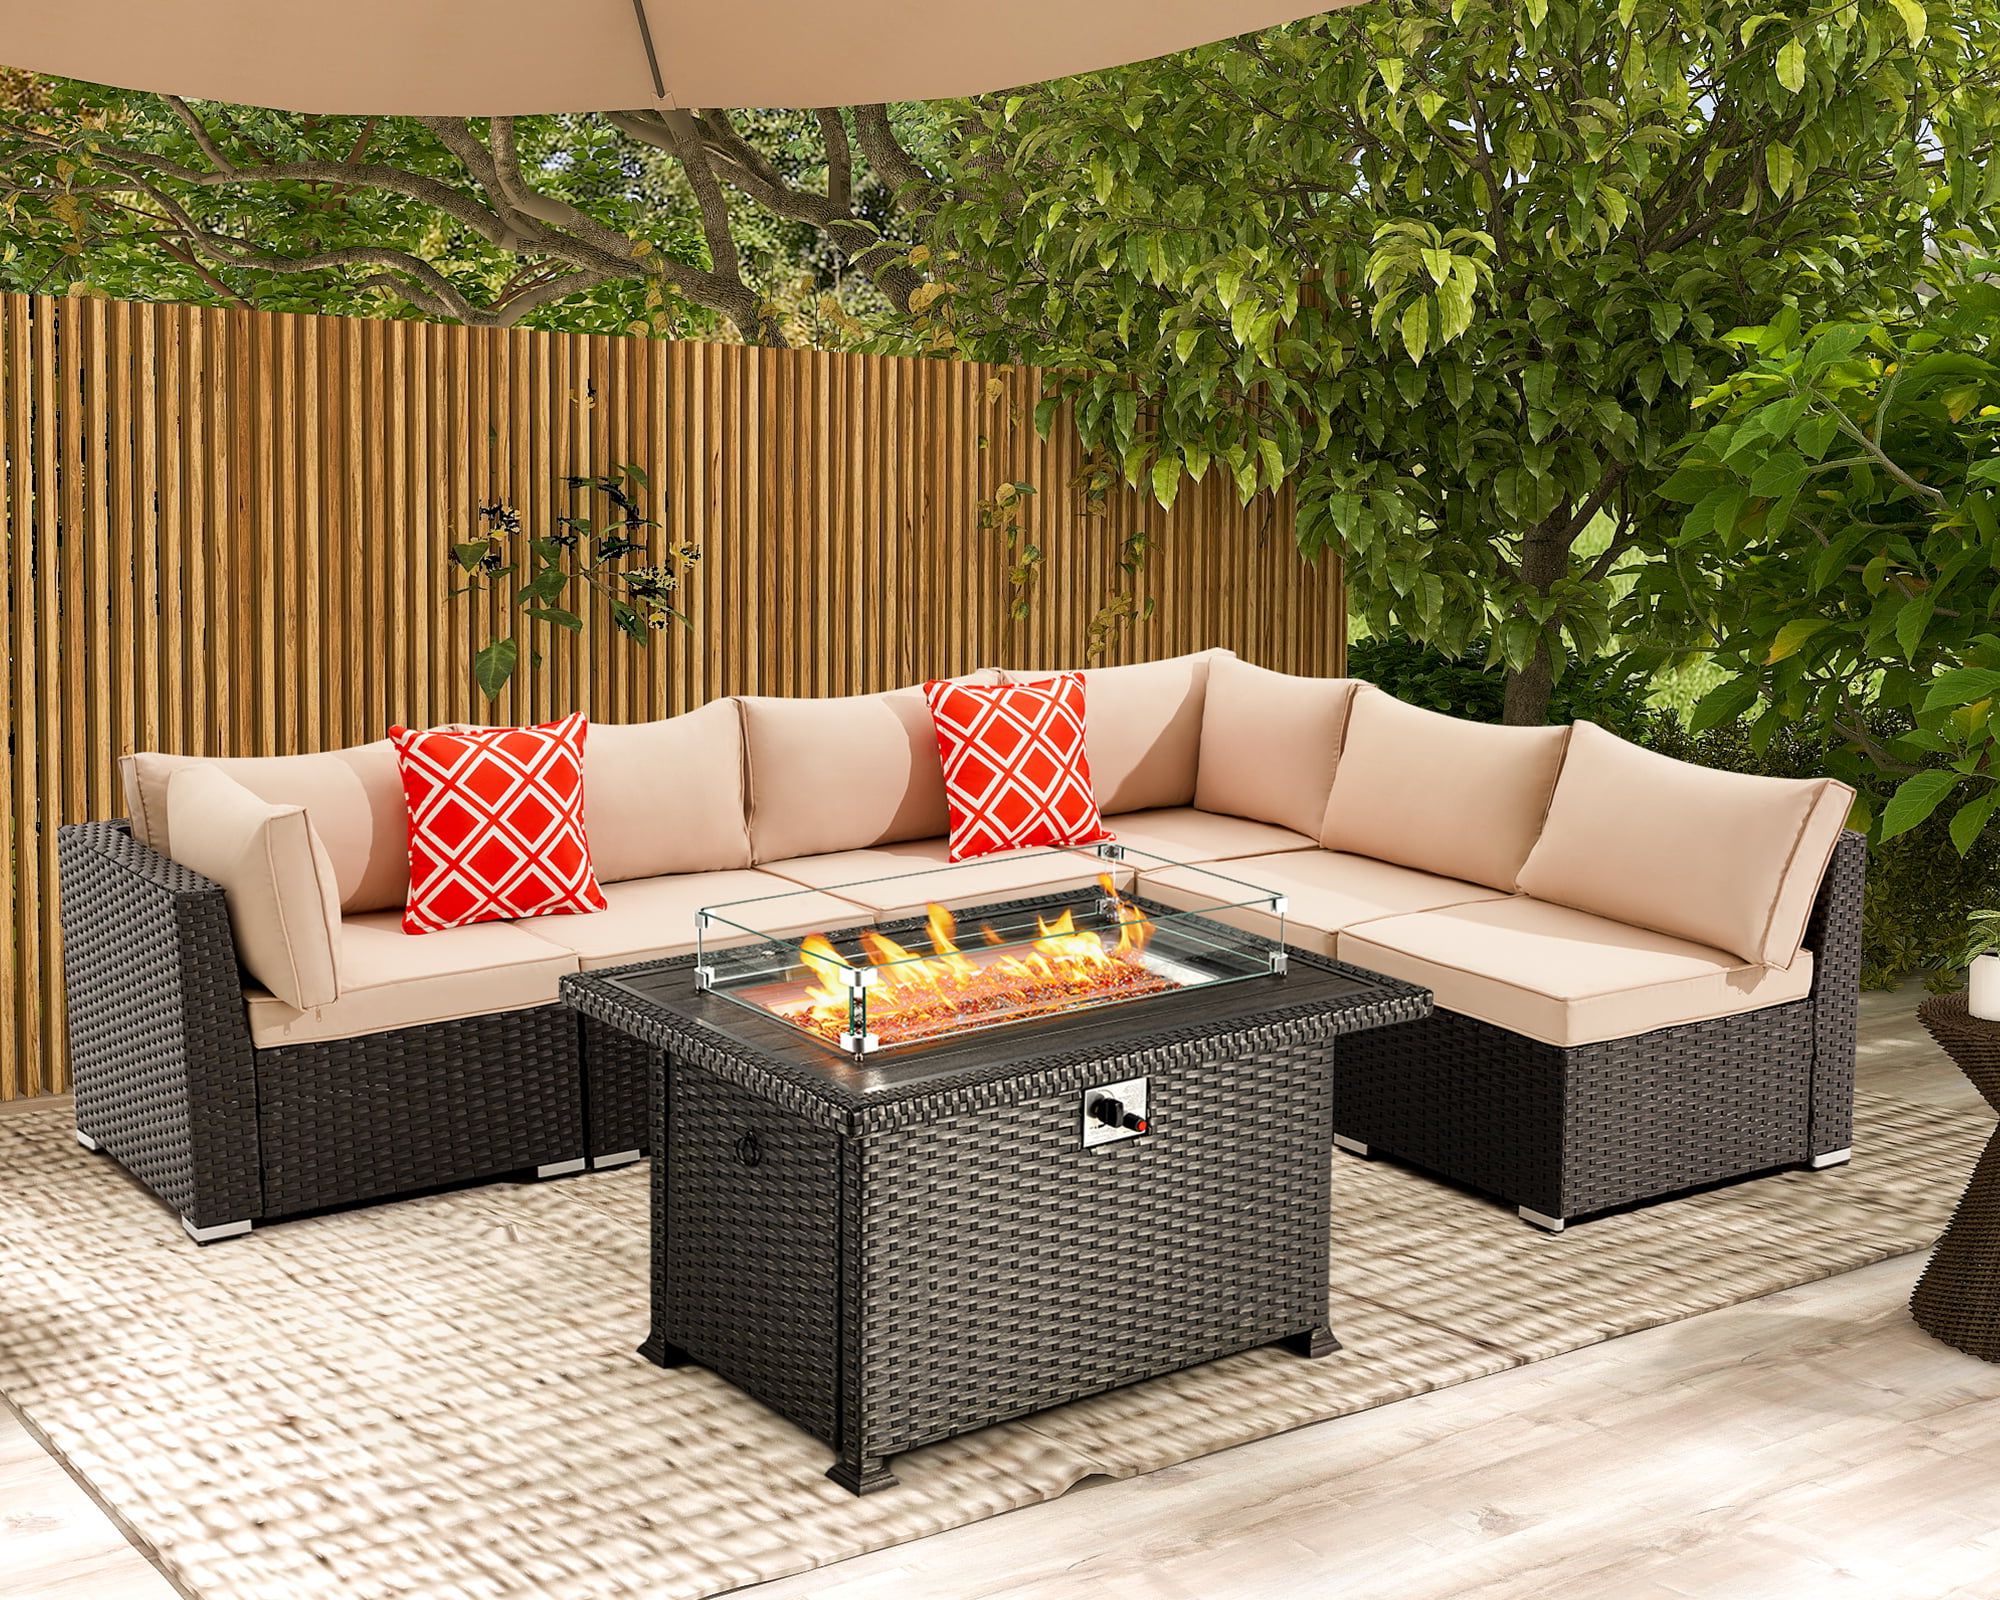 Fire Pit Table Wicker Sectional Sofa Set Pertaining To Current Hugiee 7 Pieces Patio Furniture Wicker Sofa Outdoor Sectional Sets With  44 Inch 50,000 Btu Gas Fire Pit Table Auto Ignition Propane Fire Pit Table,  Khaki – Walmart (Photo 2 of 15)